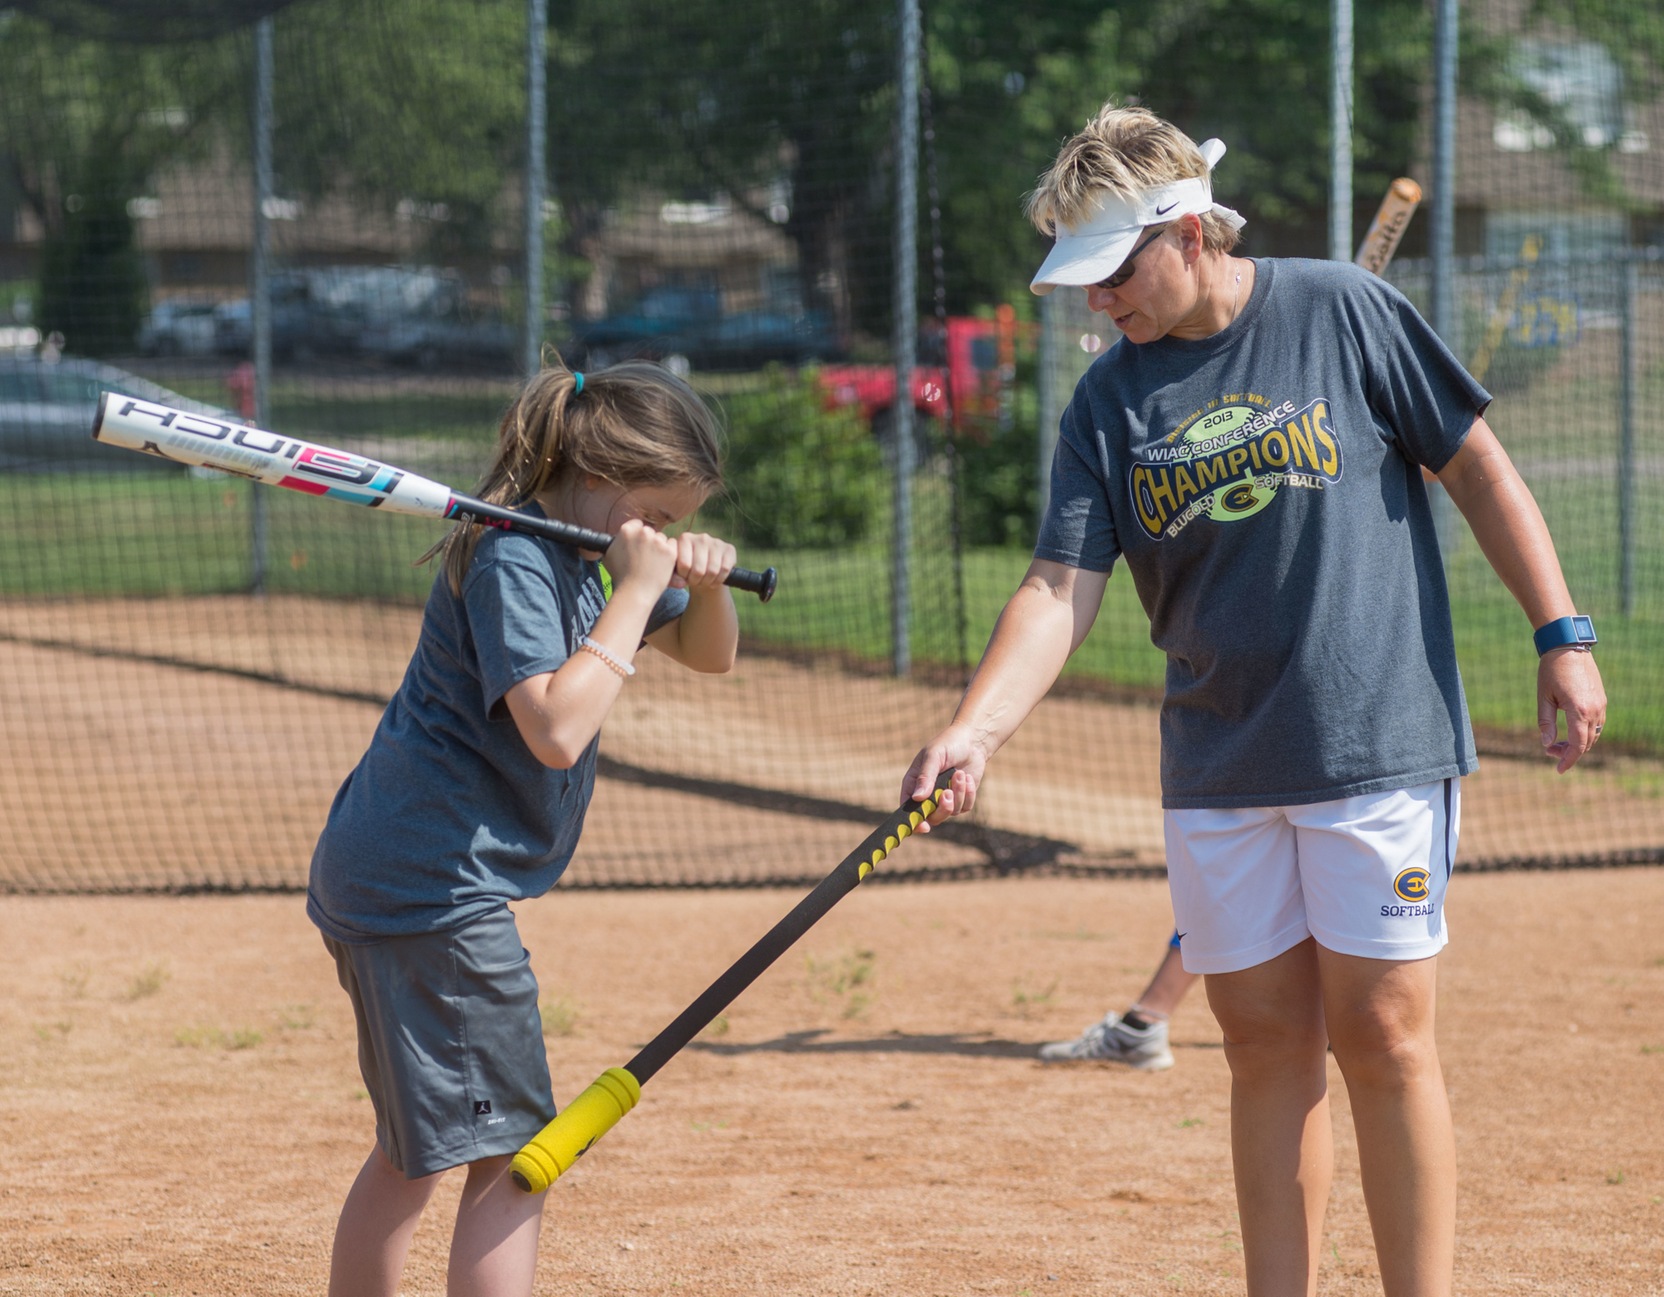 Schenck of Hitting Illustrated to lead clinics in September